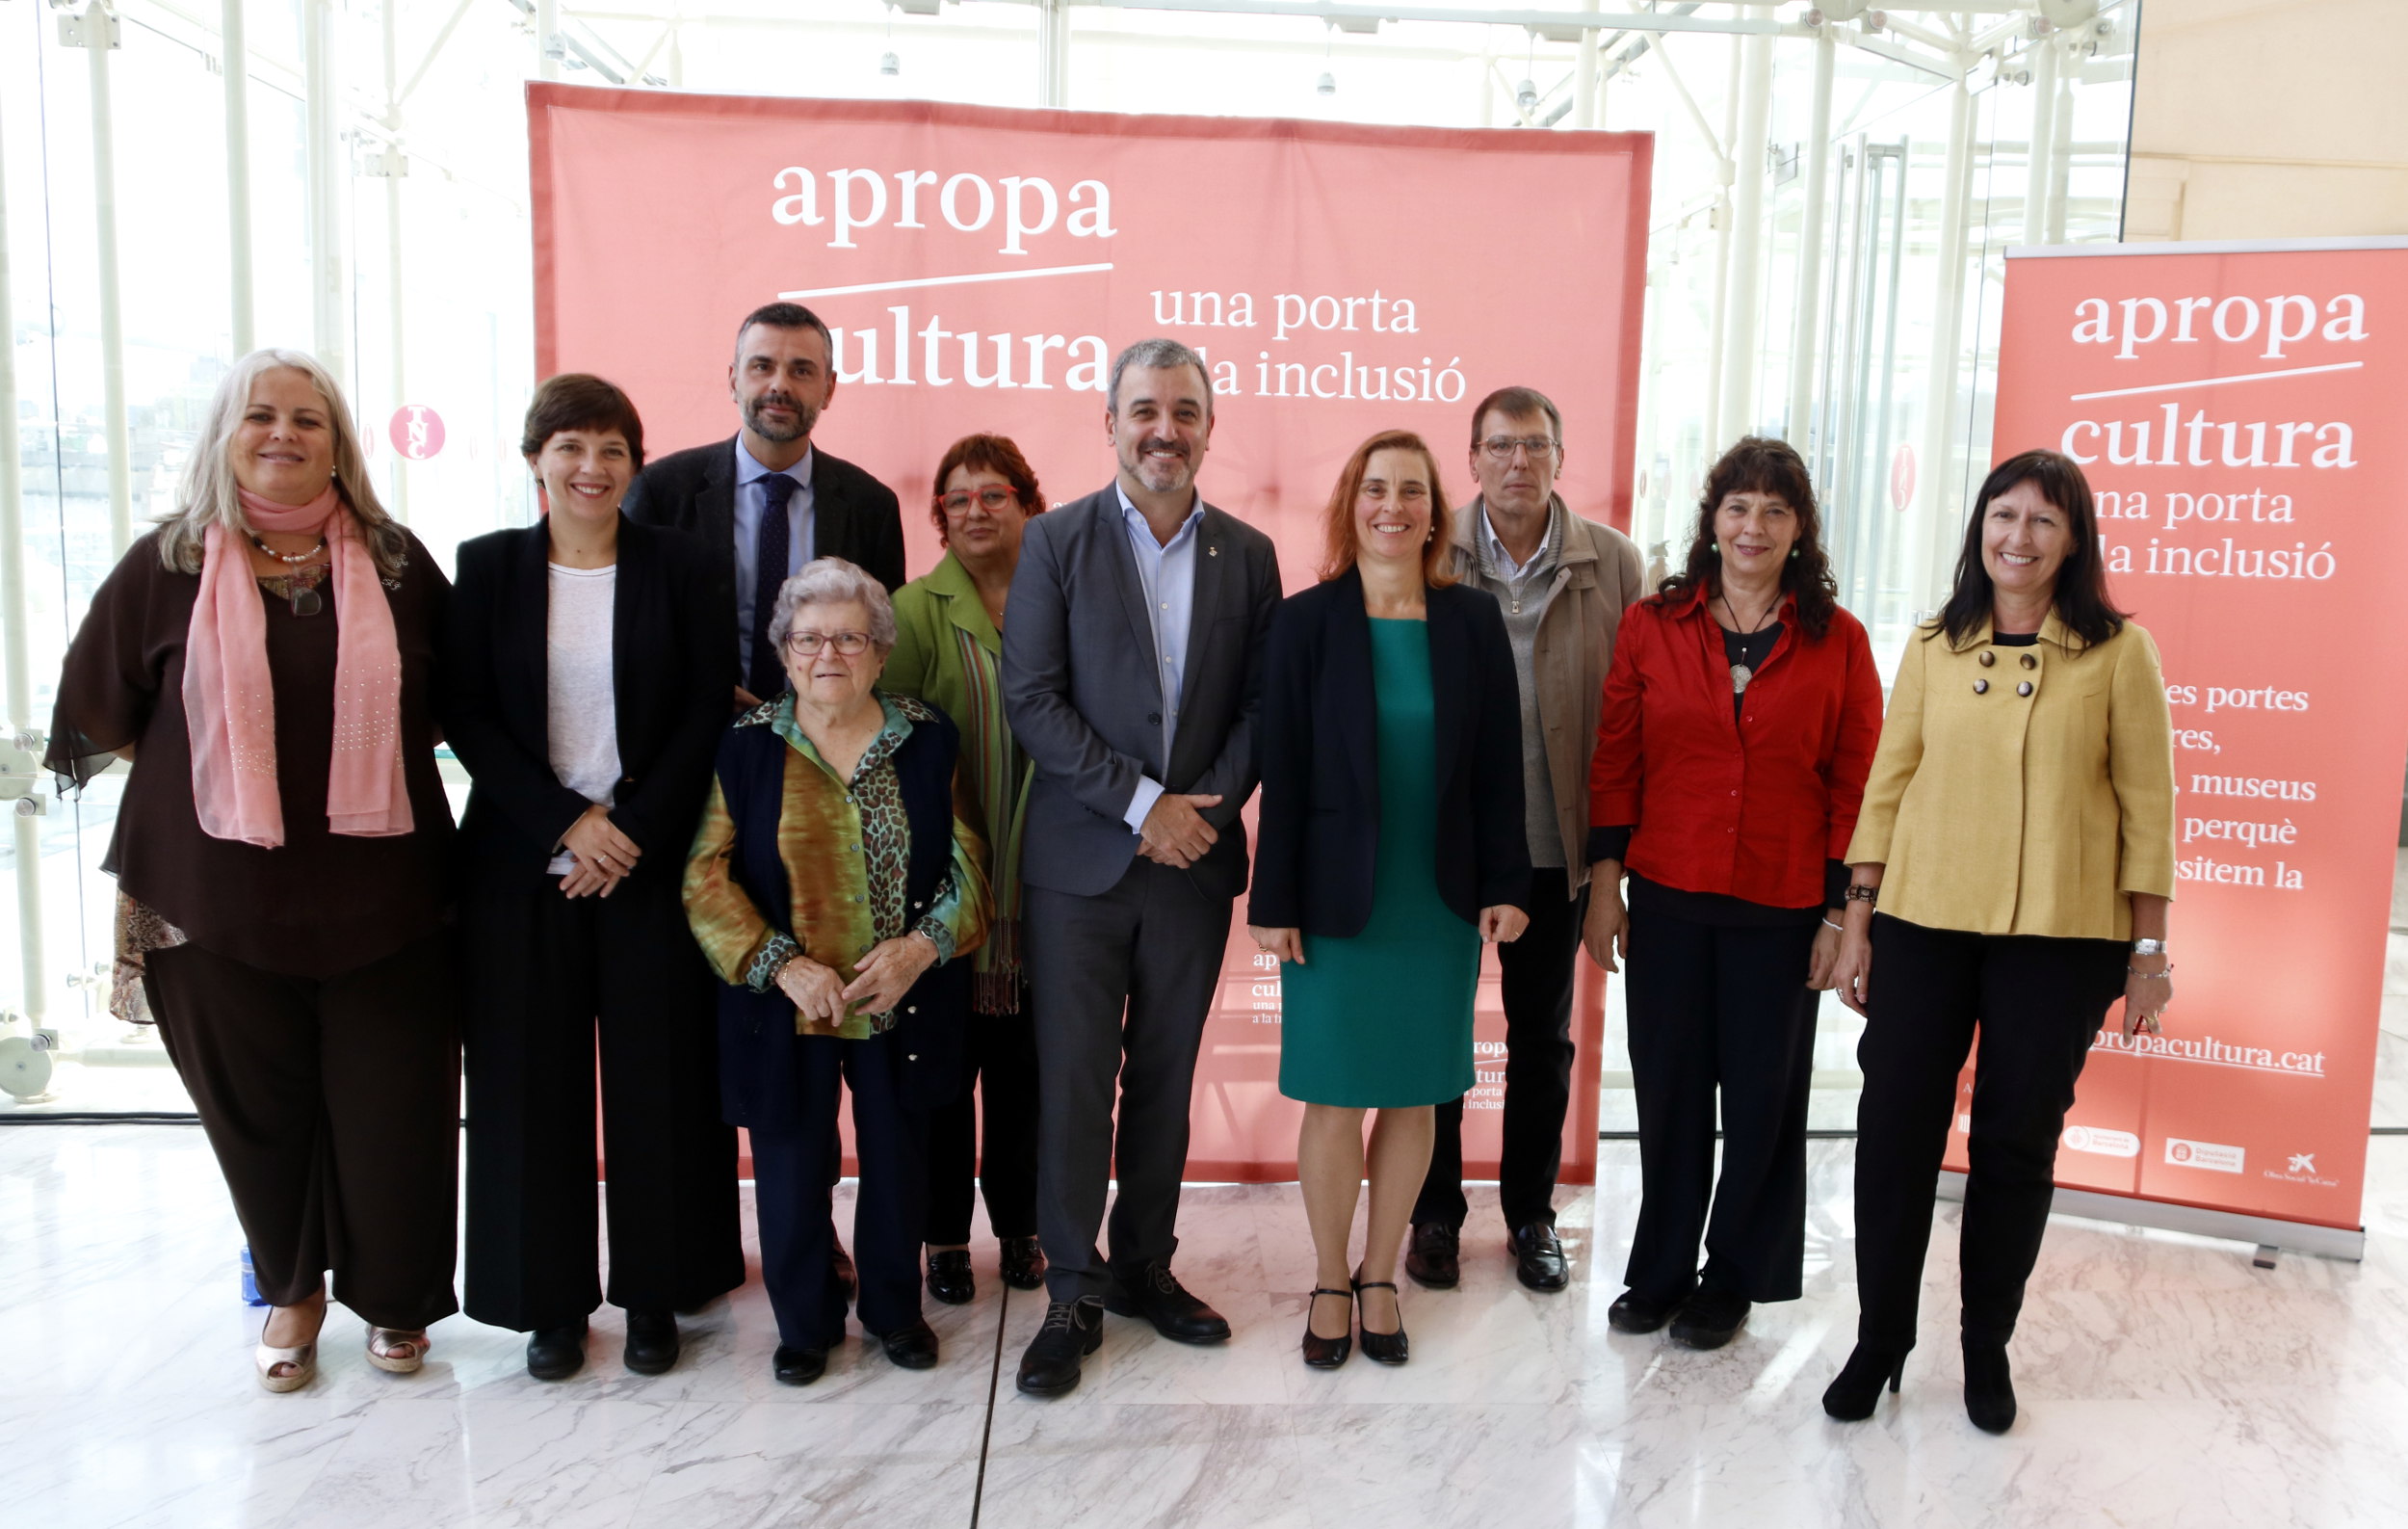 The director of ‘Apropa Cultura’, Sònia Gainza, surrounded by responsible authorities of the administrations and the amenities, and some users of the programme (by ACN)